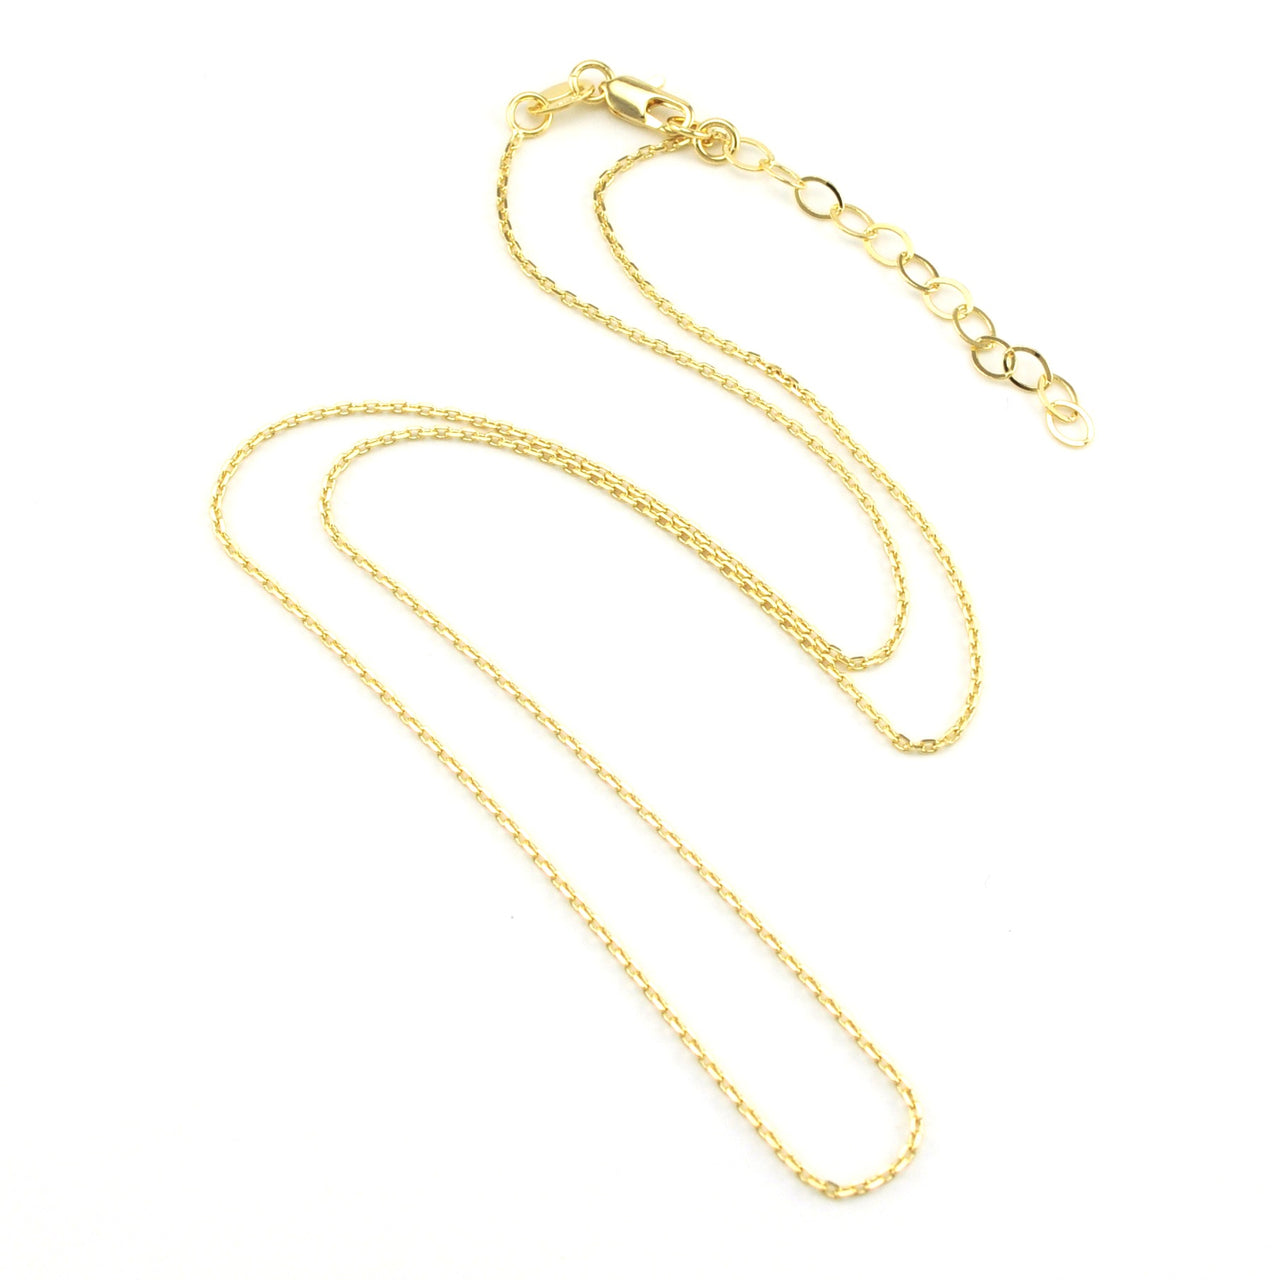 18k Gold Fill 18 Inch Diamond Cut Cable .9mm Chain with Extender